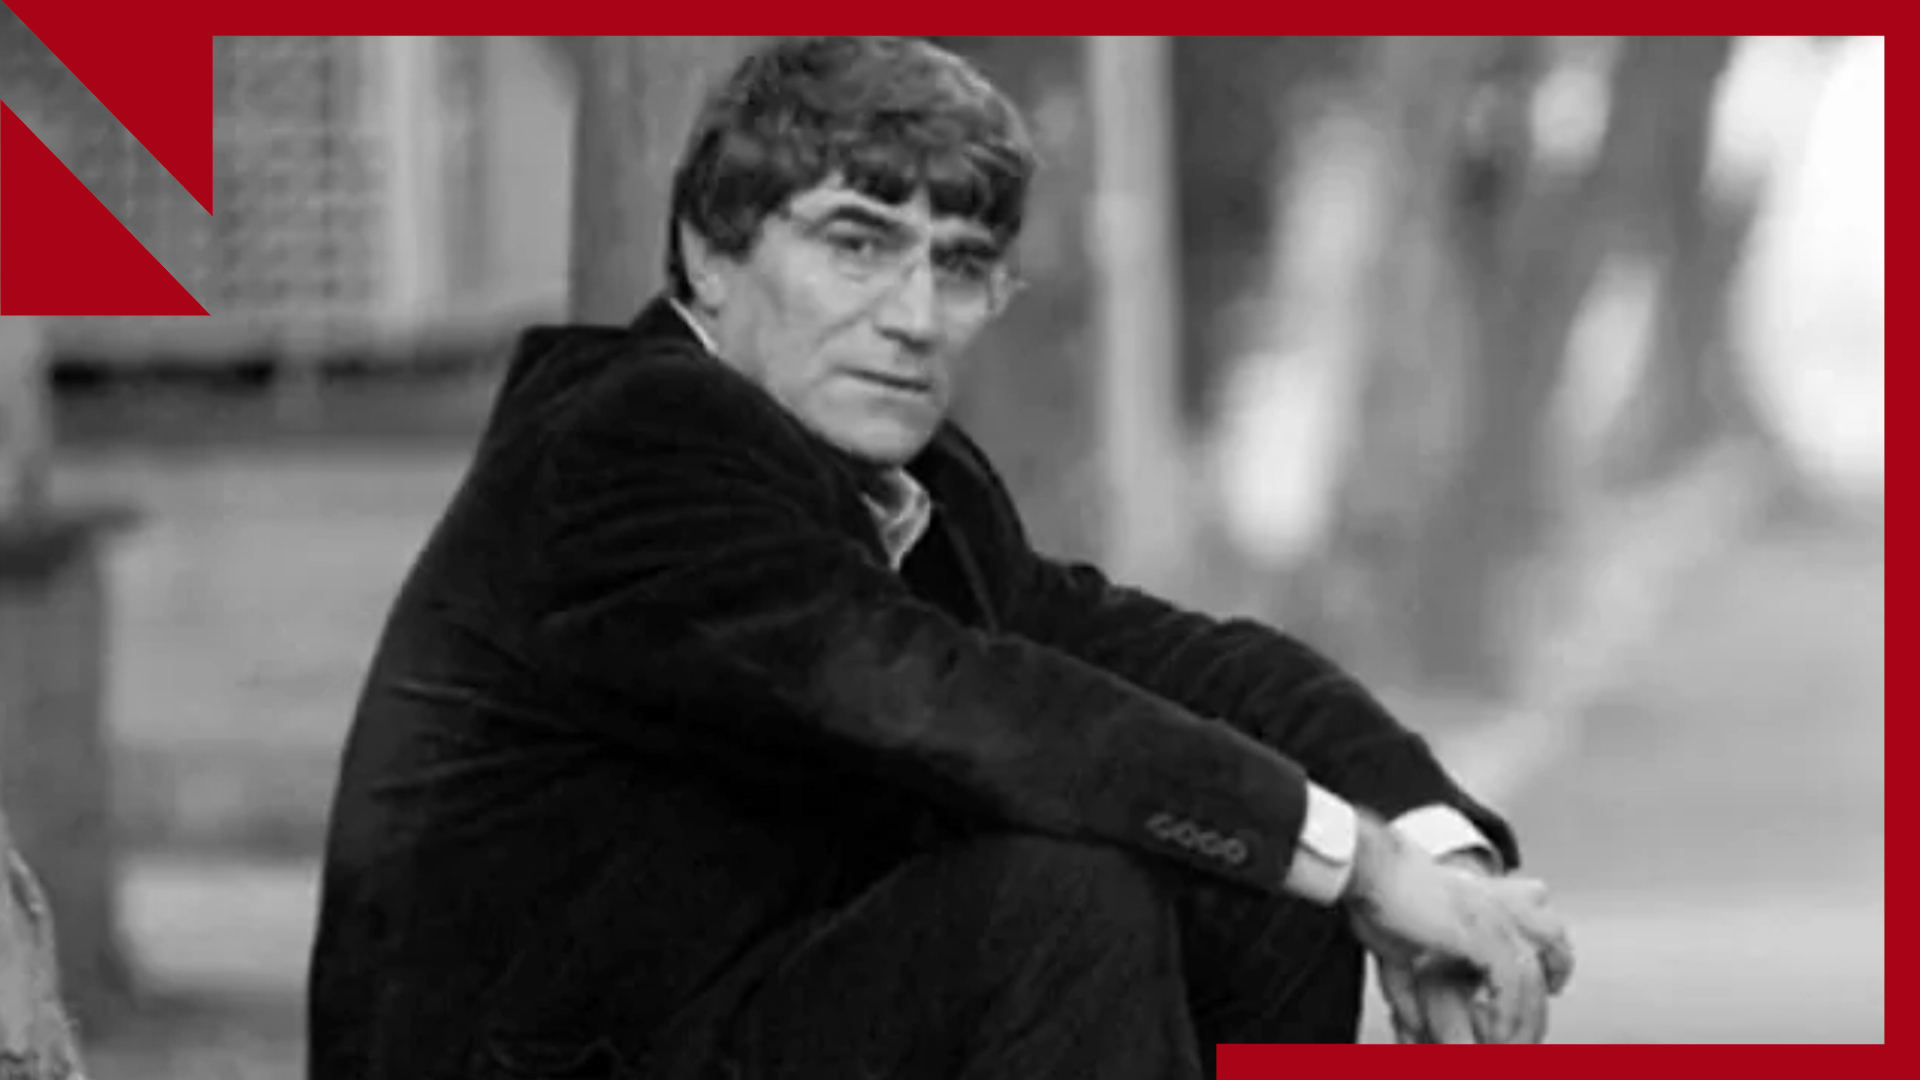 LIVE. Commemorating the life and legacy of Hrant Dink